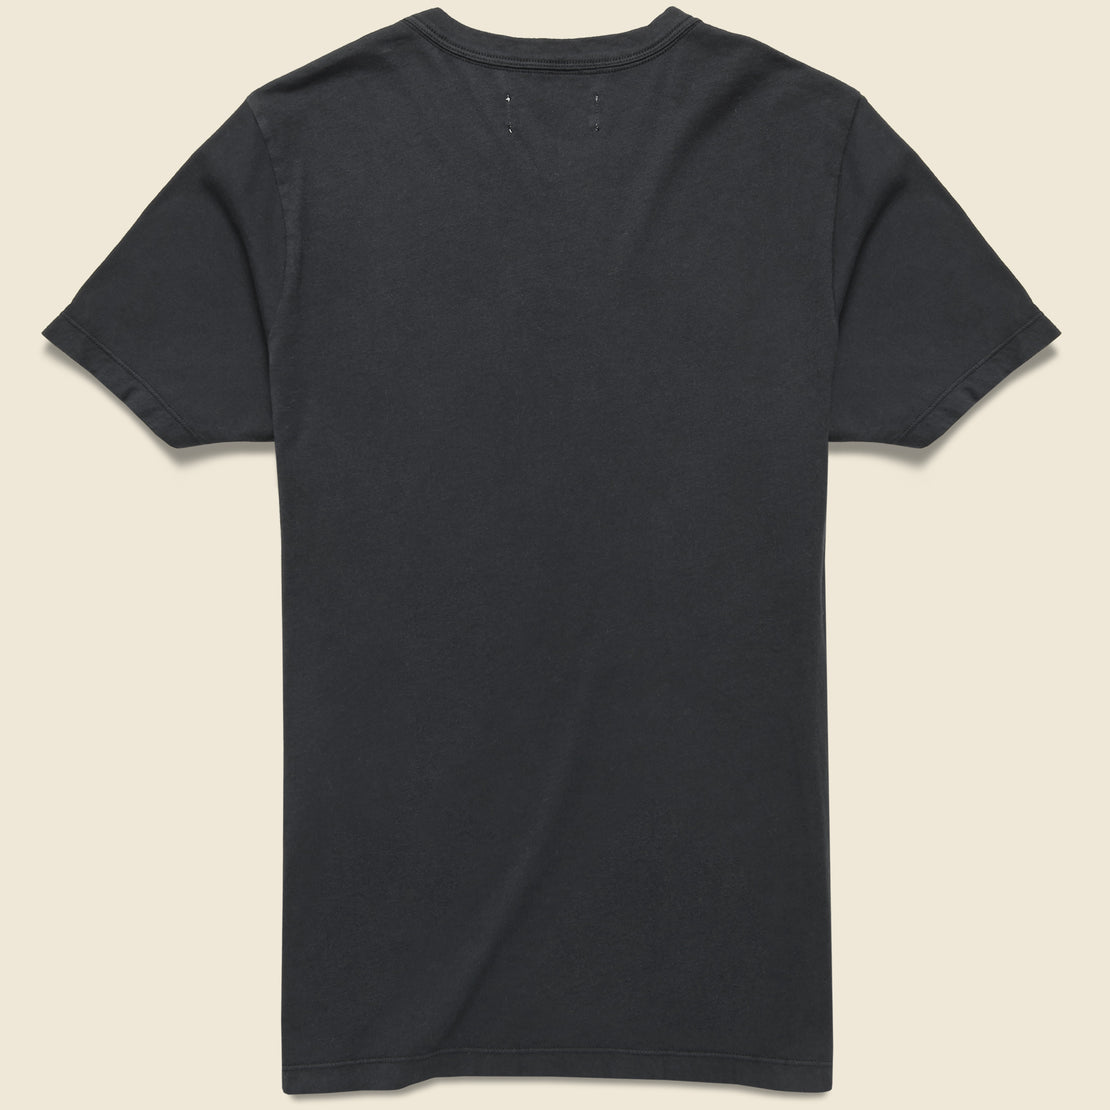 Black Magic Tee - Black - Imogene + Willie - STAG Provisions - Tops - S/S Tee - Graphic